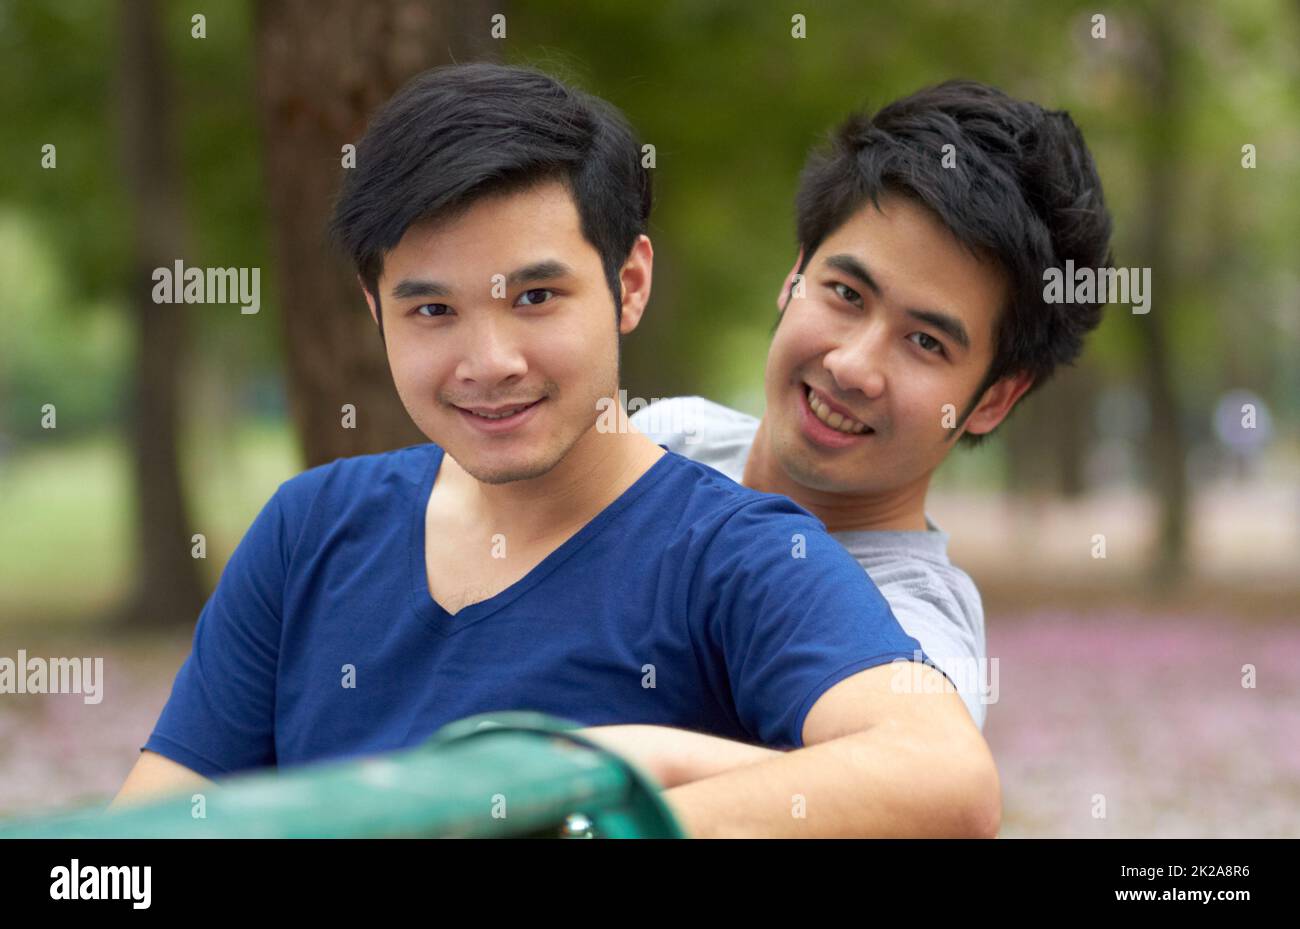 Enjoying the freedom to be themselves. Cute young gay Asian couple smiling together while sitting in the park. Stock Photo